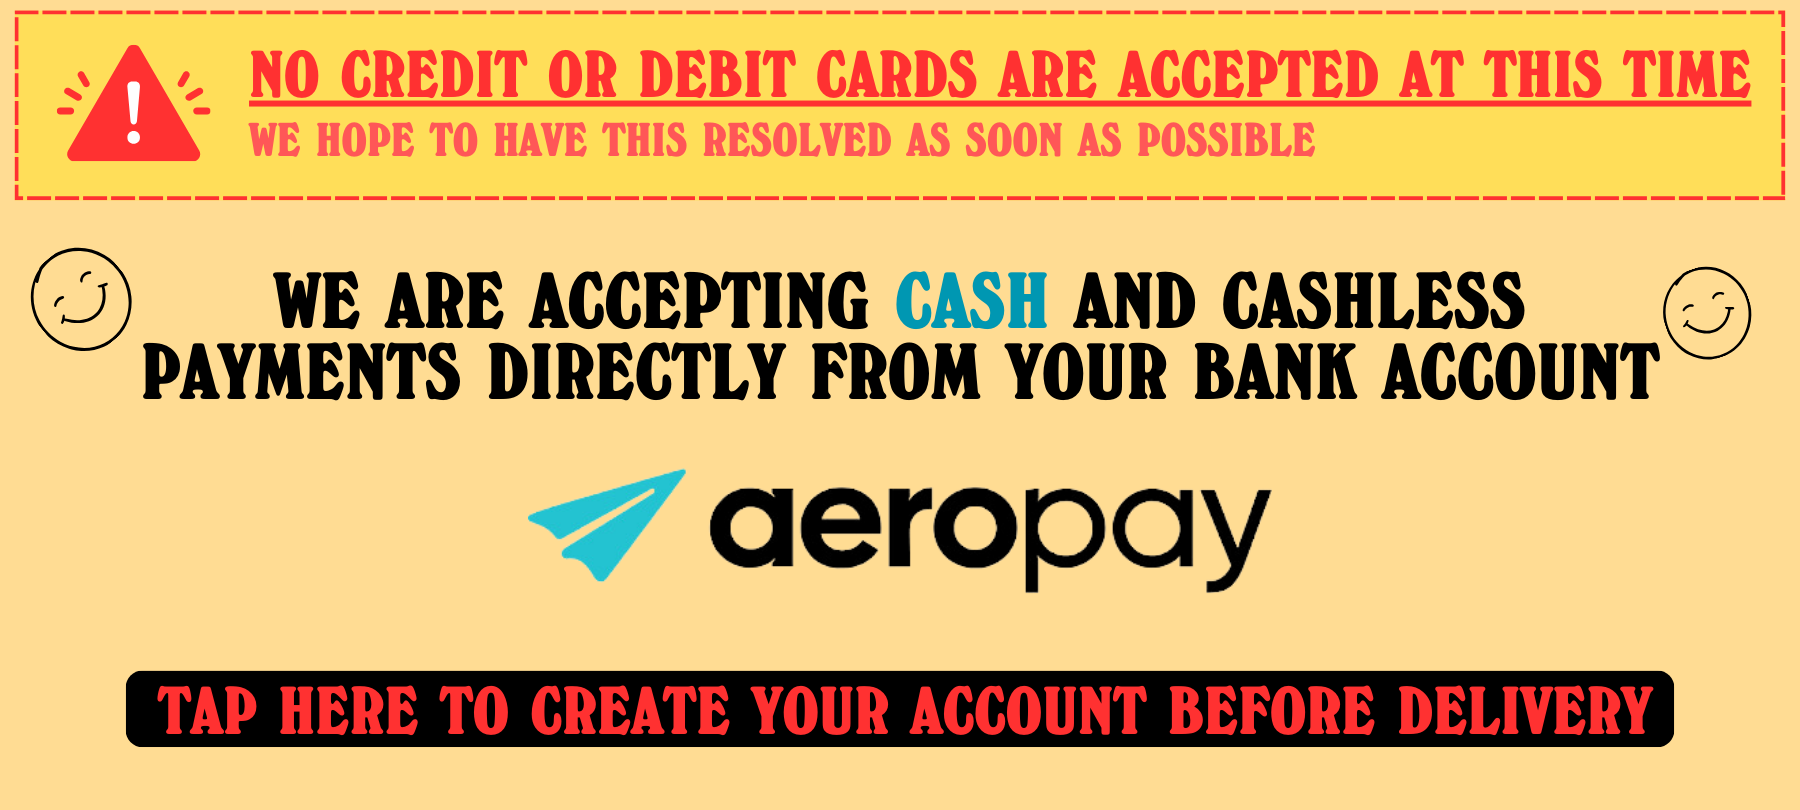 CASHLESS IS BACK, Aero Pay is now our cashless payment option, No Debit and no Credit card payments at the moment.